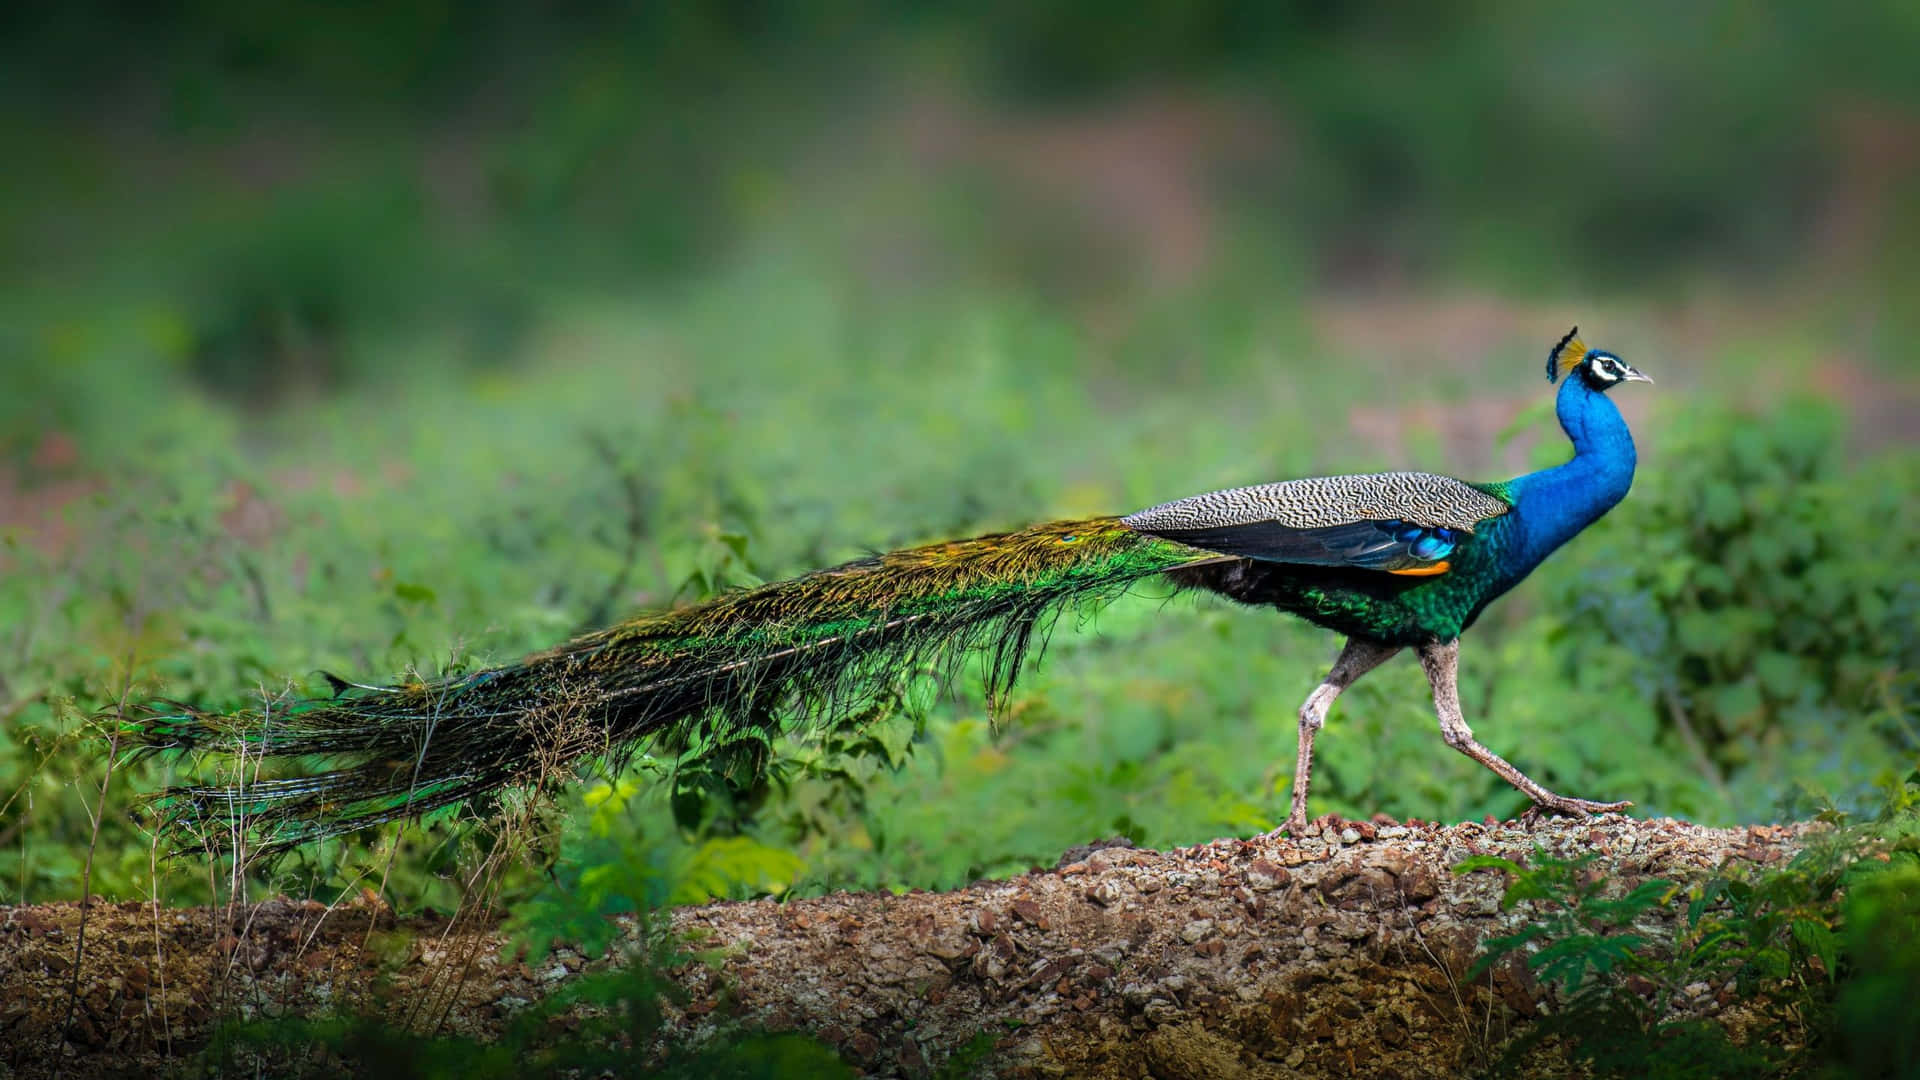 Brilliantly Colored Peacock in Its Natural Setting